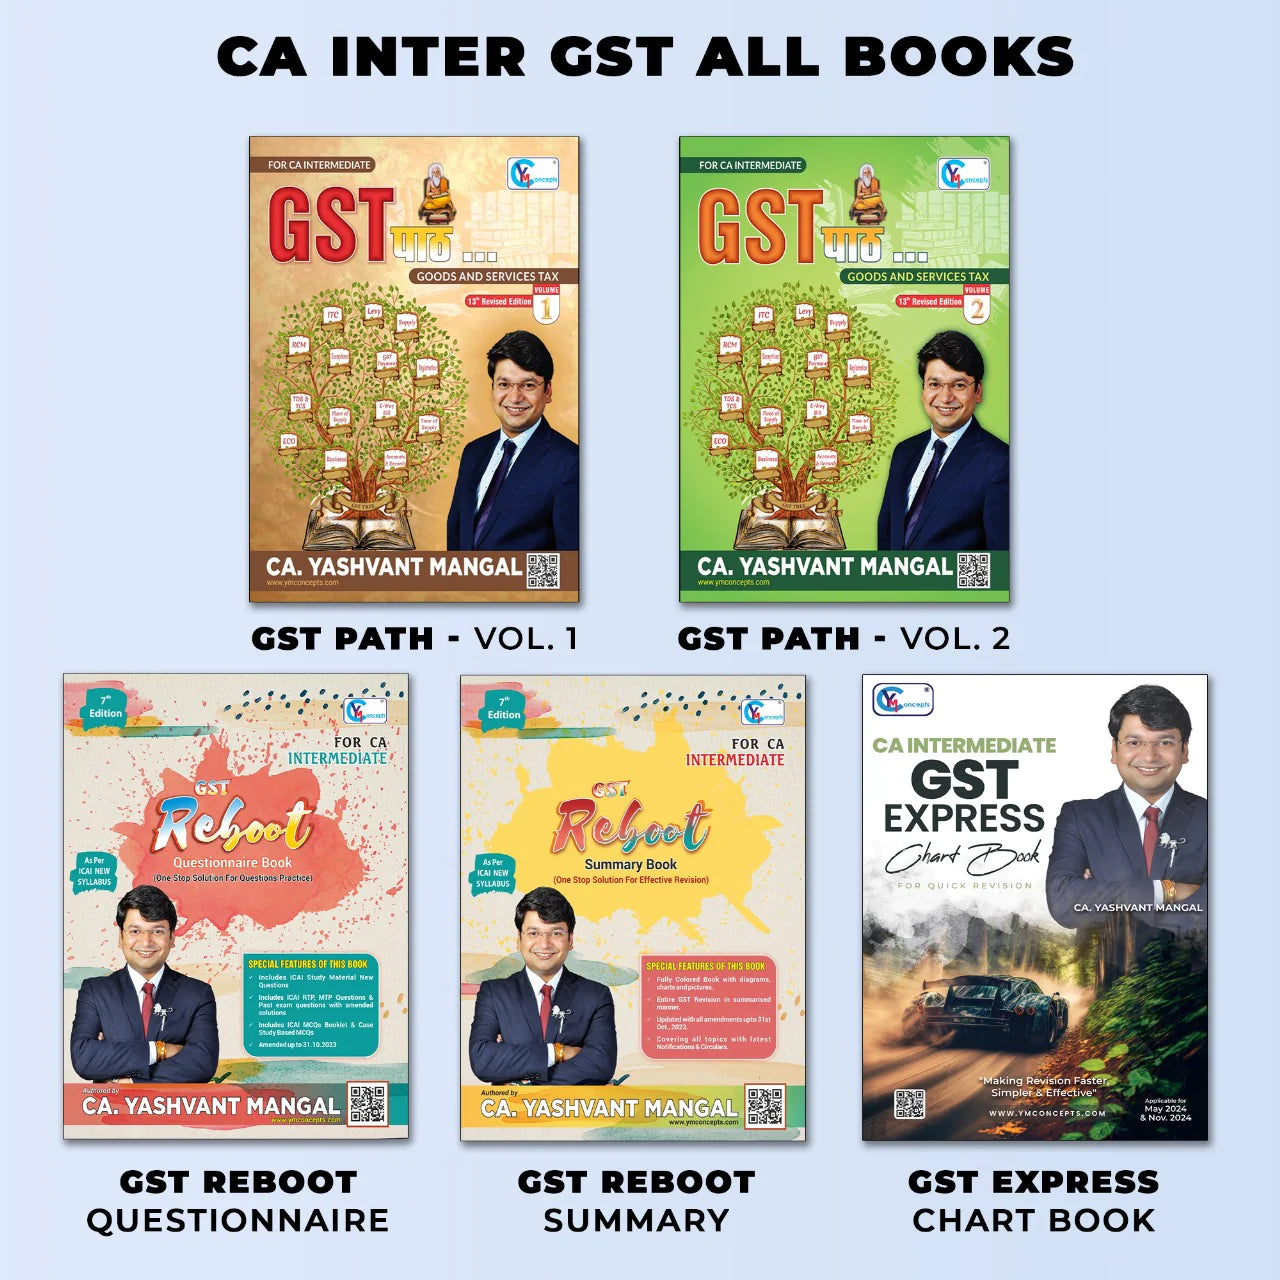 CA Inter GST ALL Books Set - GST पाठ A Conceptual Learning Book + GST Reboot Questionnaire Book + GST Reboot Summary Book + GST Express Chart Book - For May 24 / Nov. 24